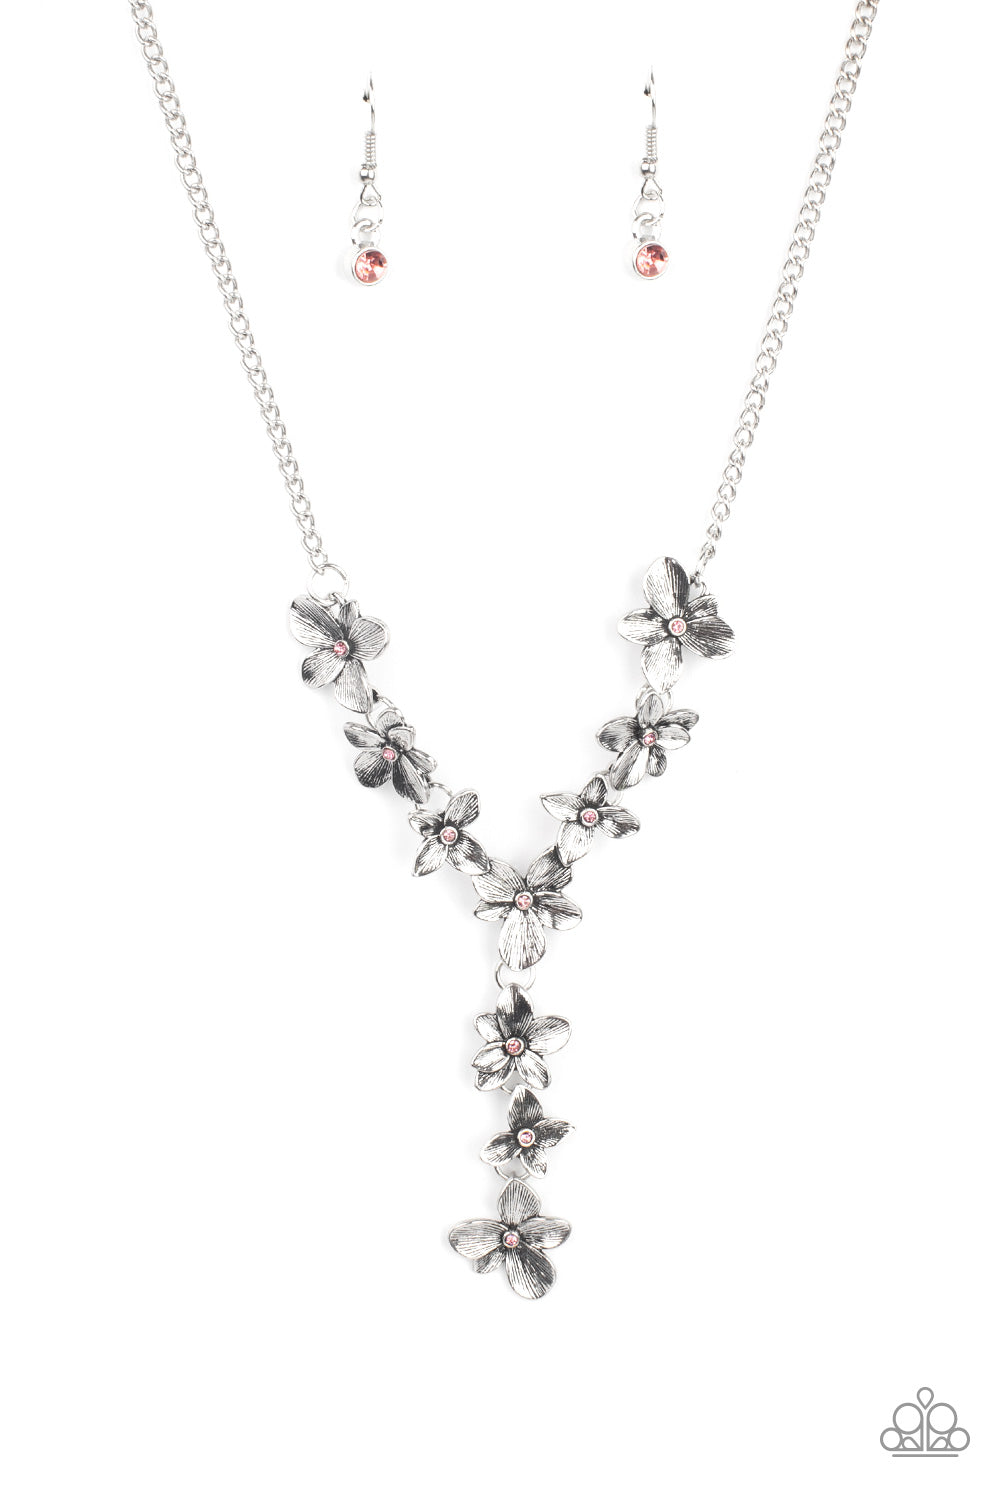 Fairytale Meadow - pink - Paparazzi necklace